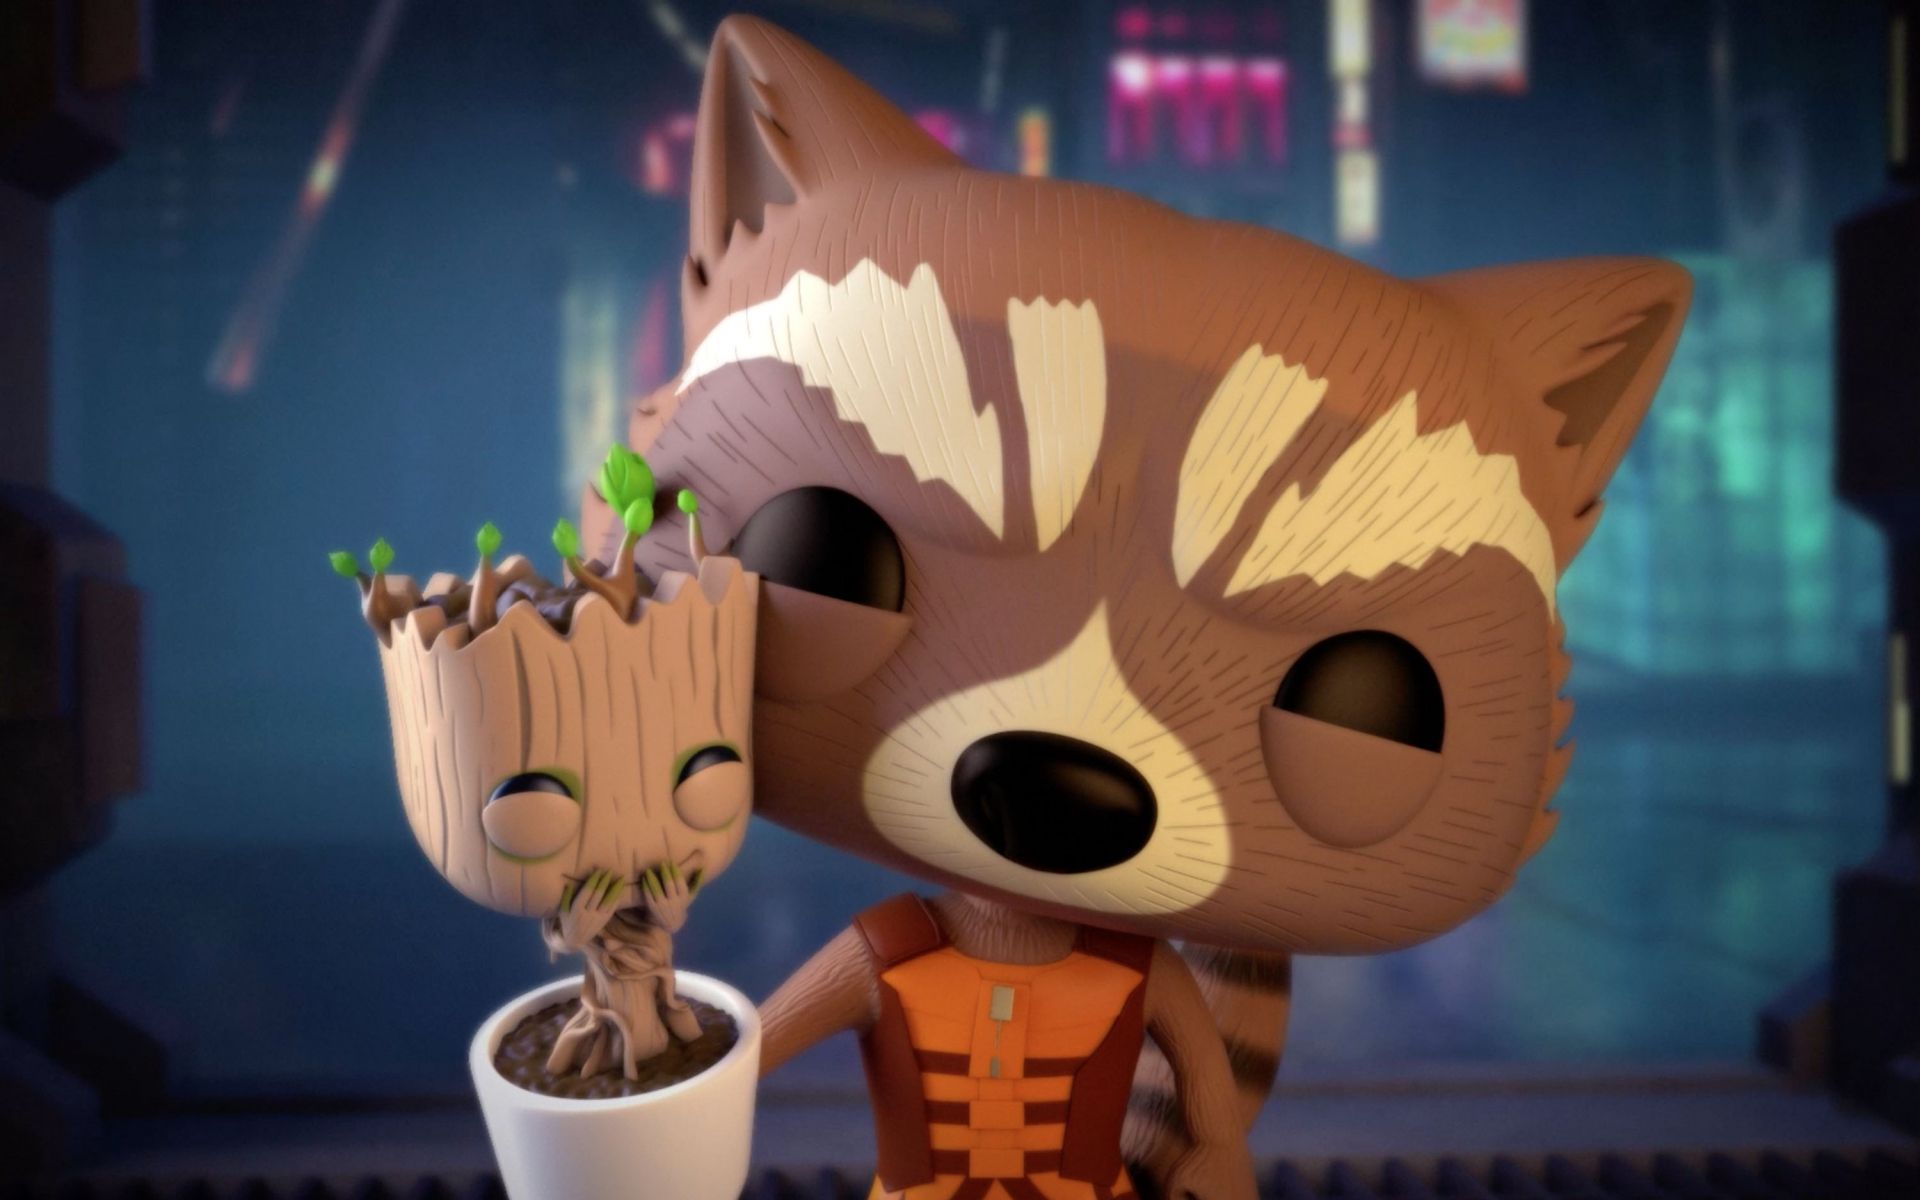 Desktop Wallpaper Rocket And Baby Groot, Guadians Of The Galaxy Vol. 2 Movie Artwork, HD Image, Picture, Background, 5gtoxa